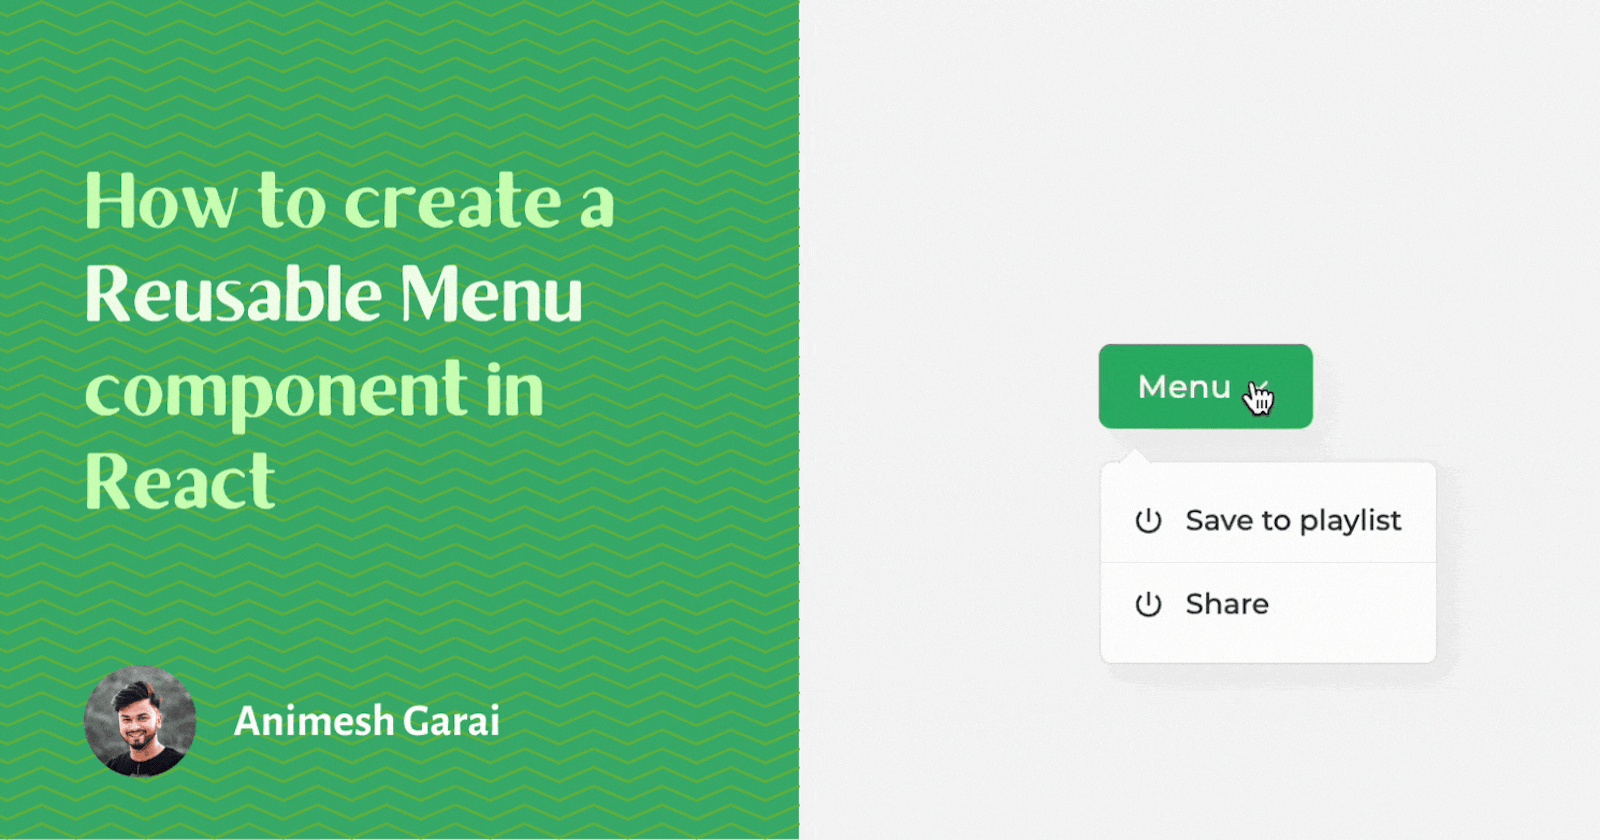 How to create a reusable menu component in React